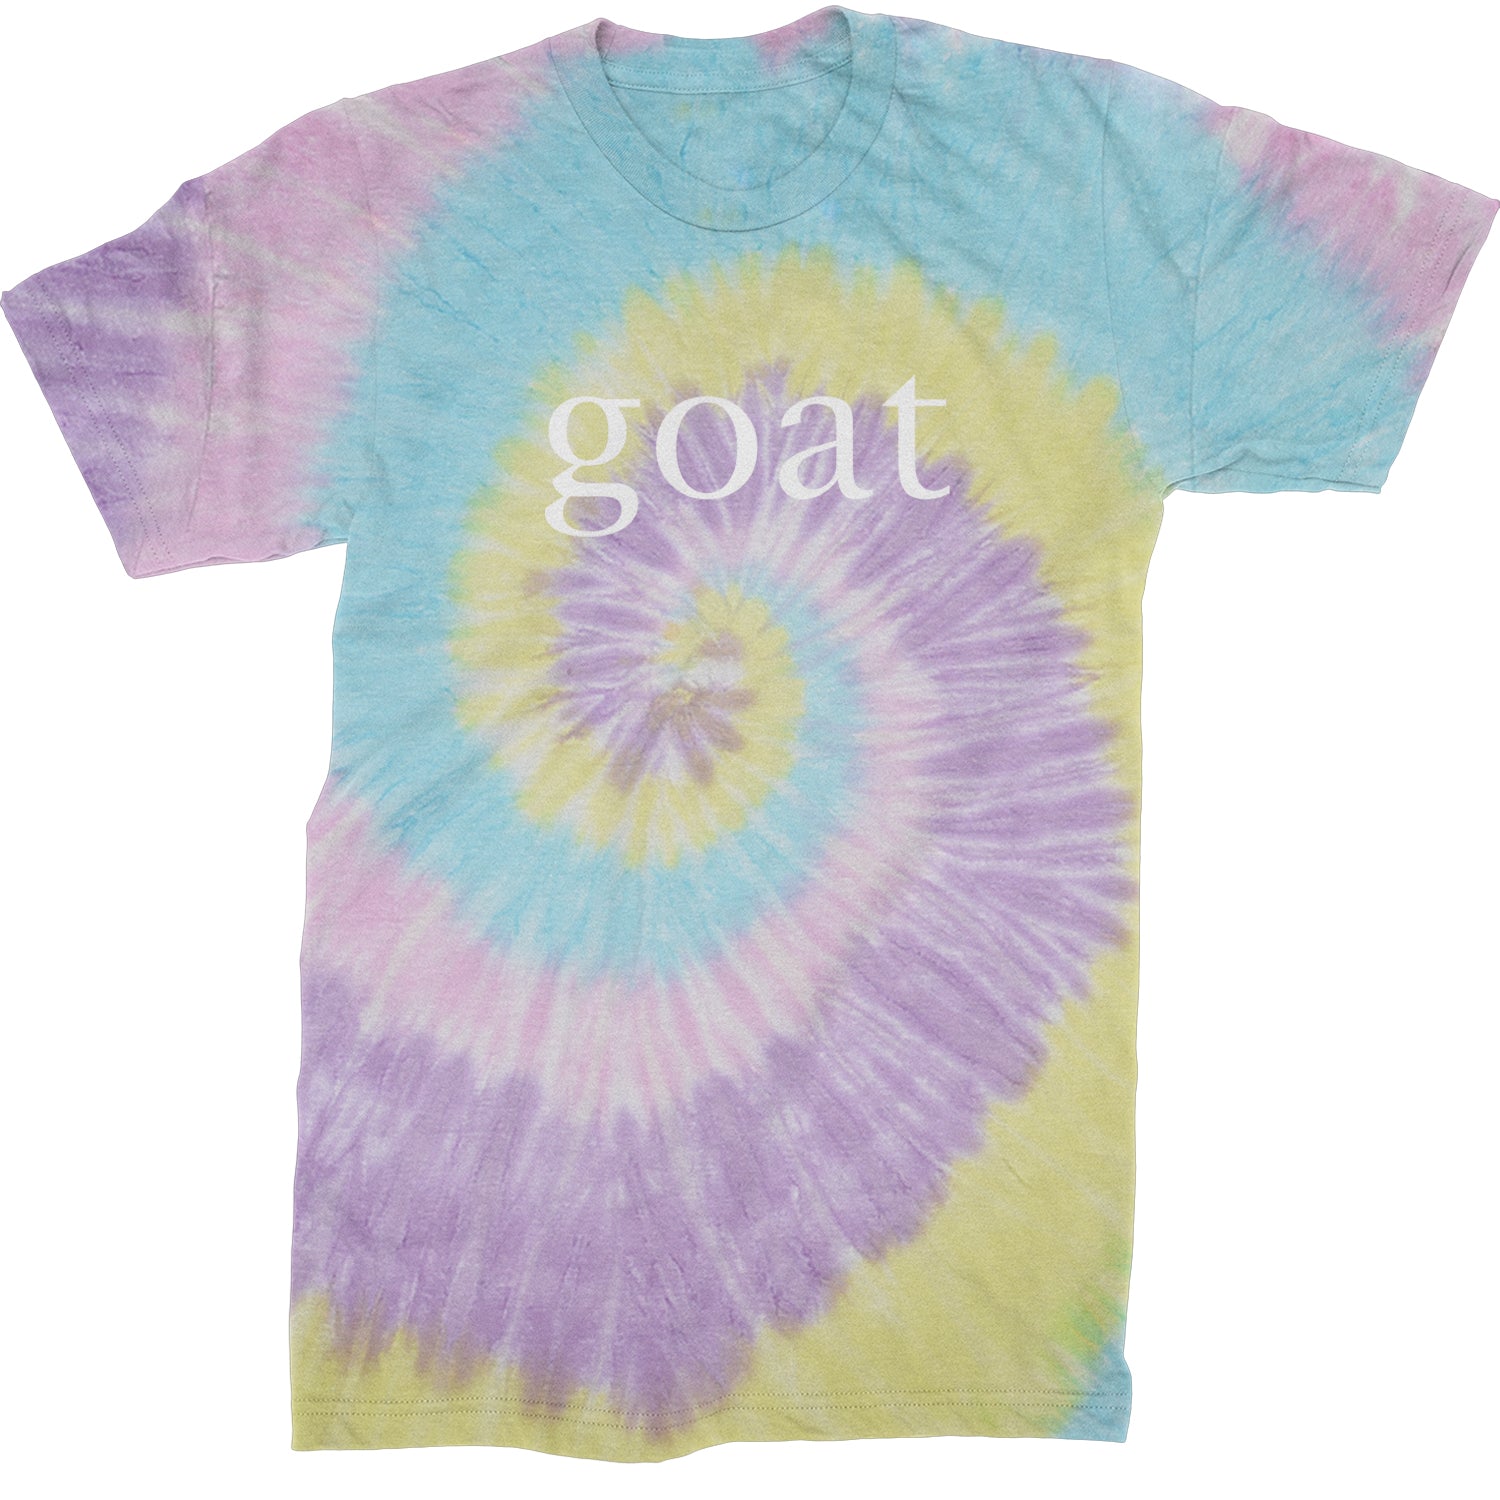 GOAT - Greatest Of All Time  Mens T-shirt Tie-Dye Jellybean